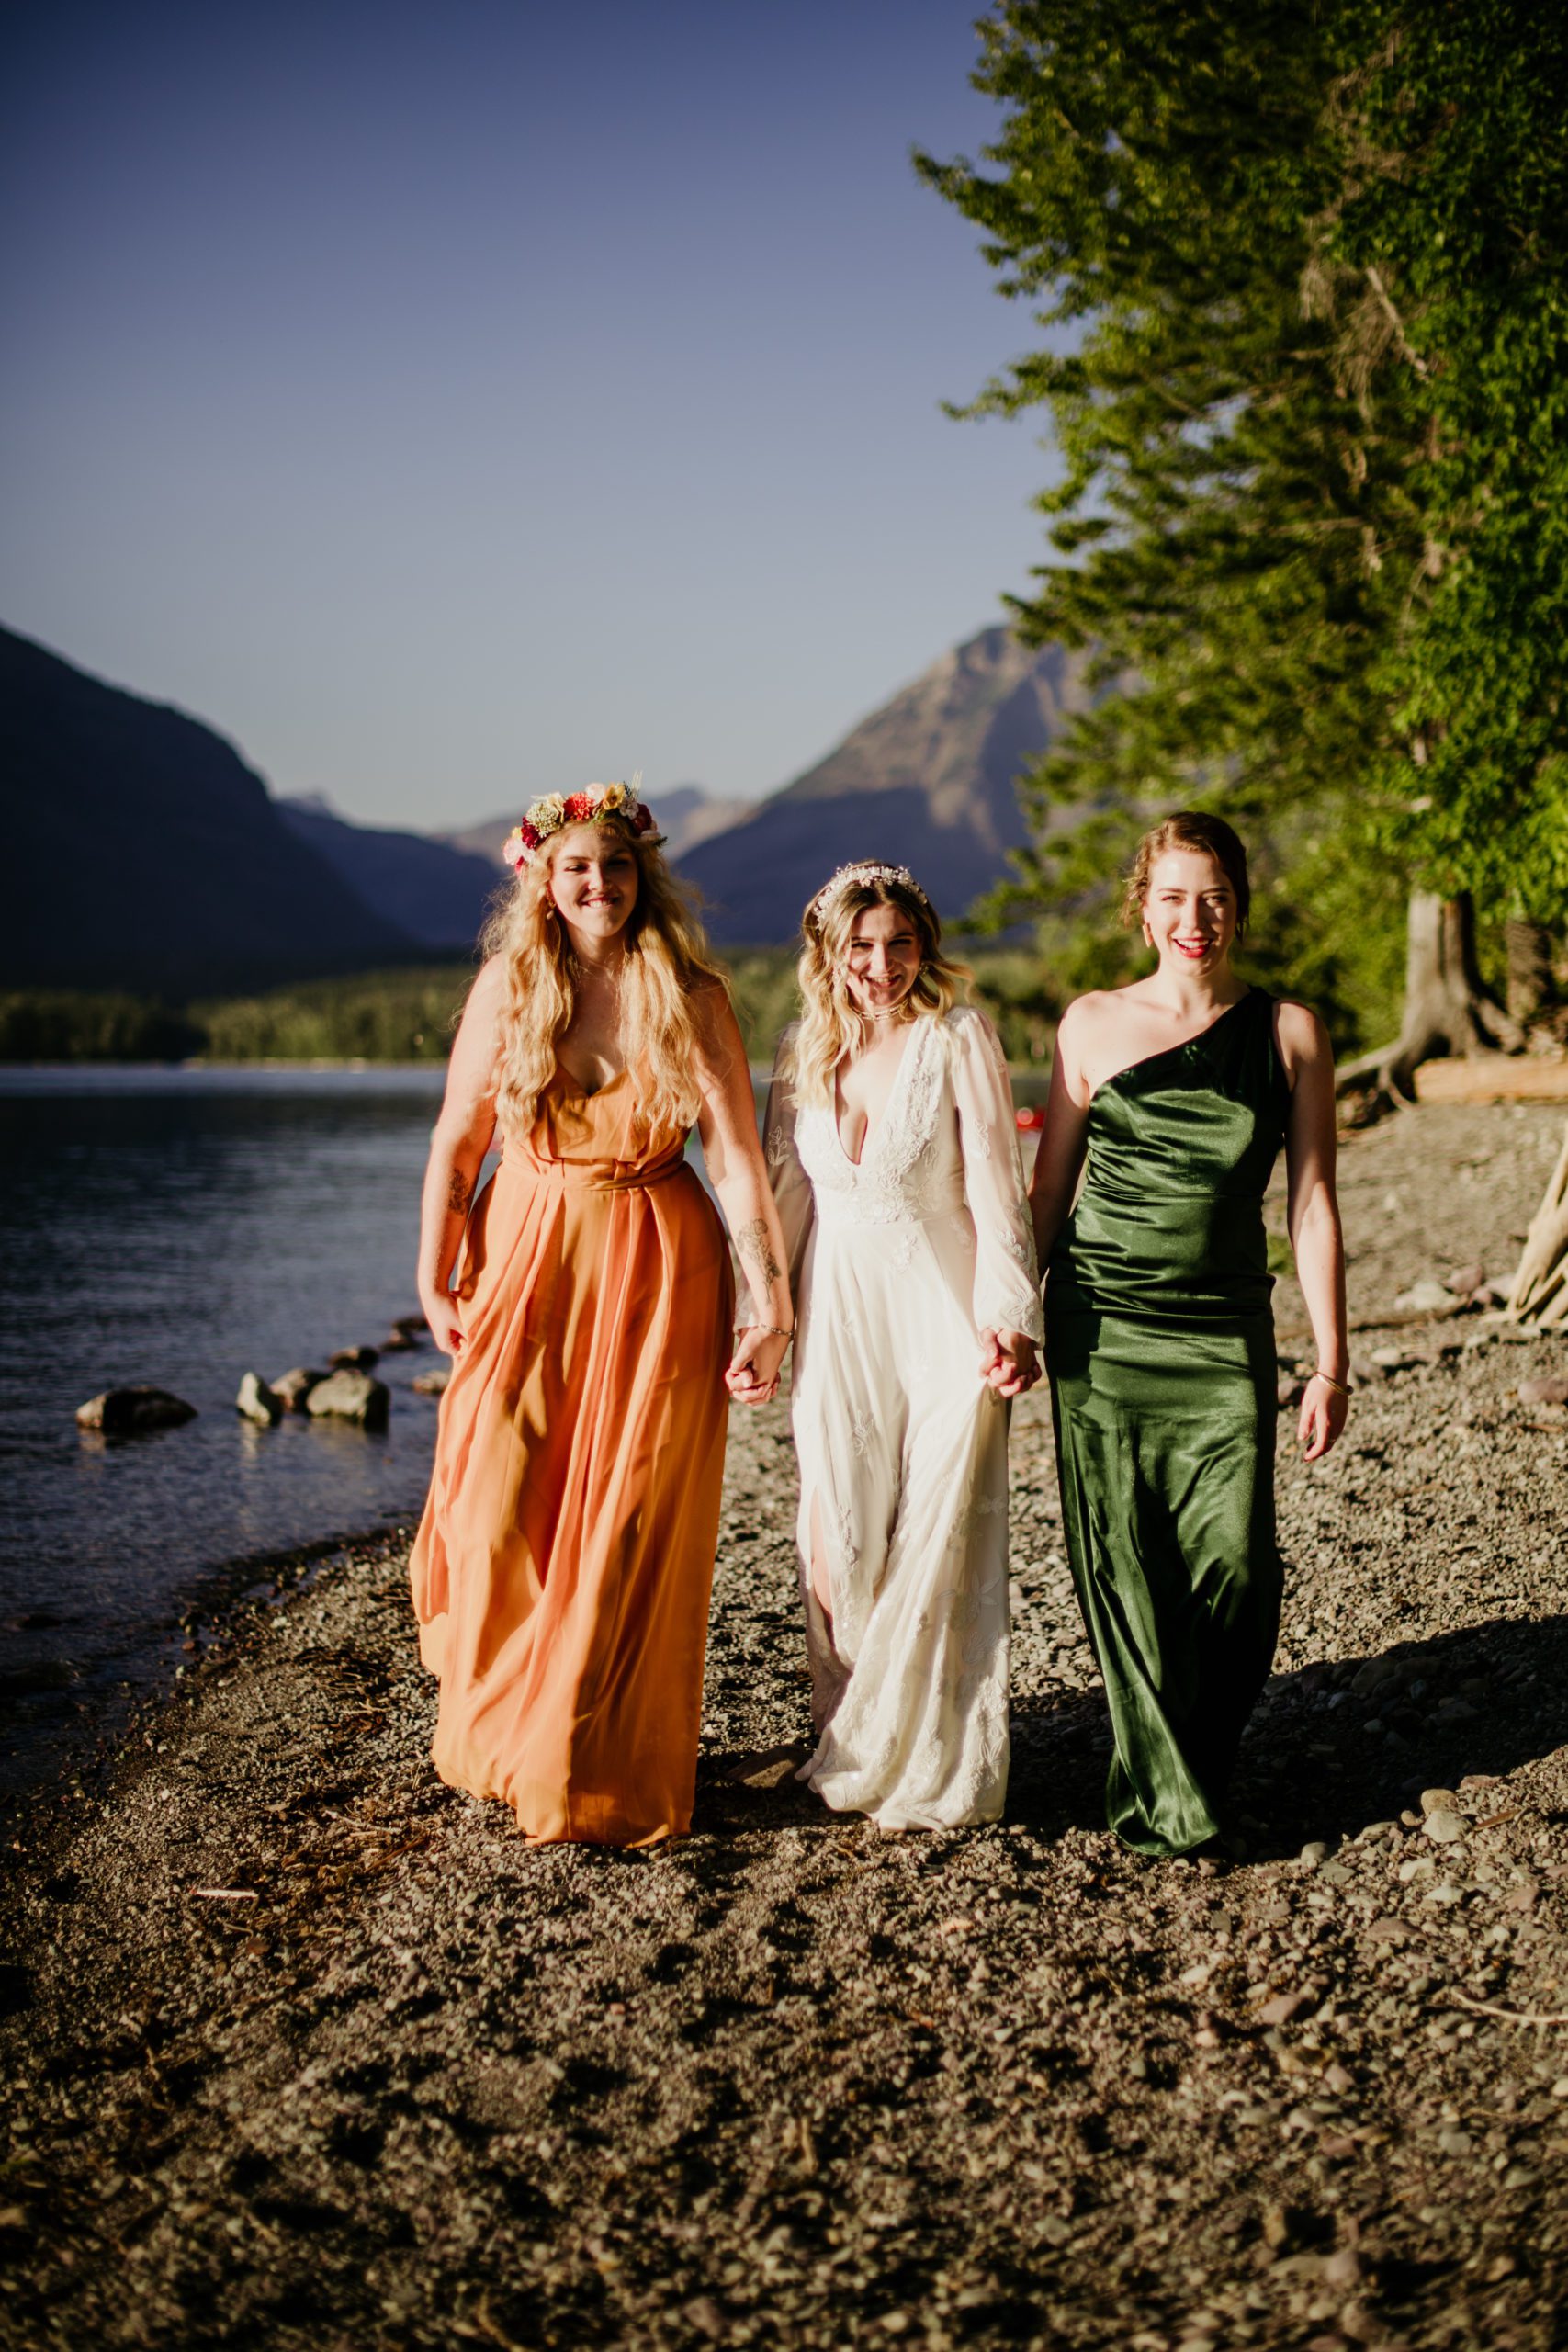 Glacier National Park micro wedding. Wedding photos on Lake McDonald. The best place for photos in Glacier National Park. Small wedding in Glacier - invite your friends and family to your wedding. Where can you get married in Glacier? 